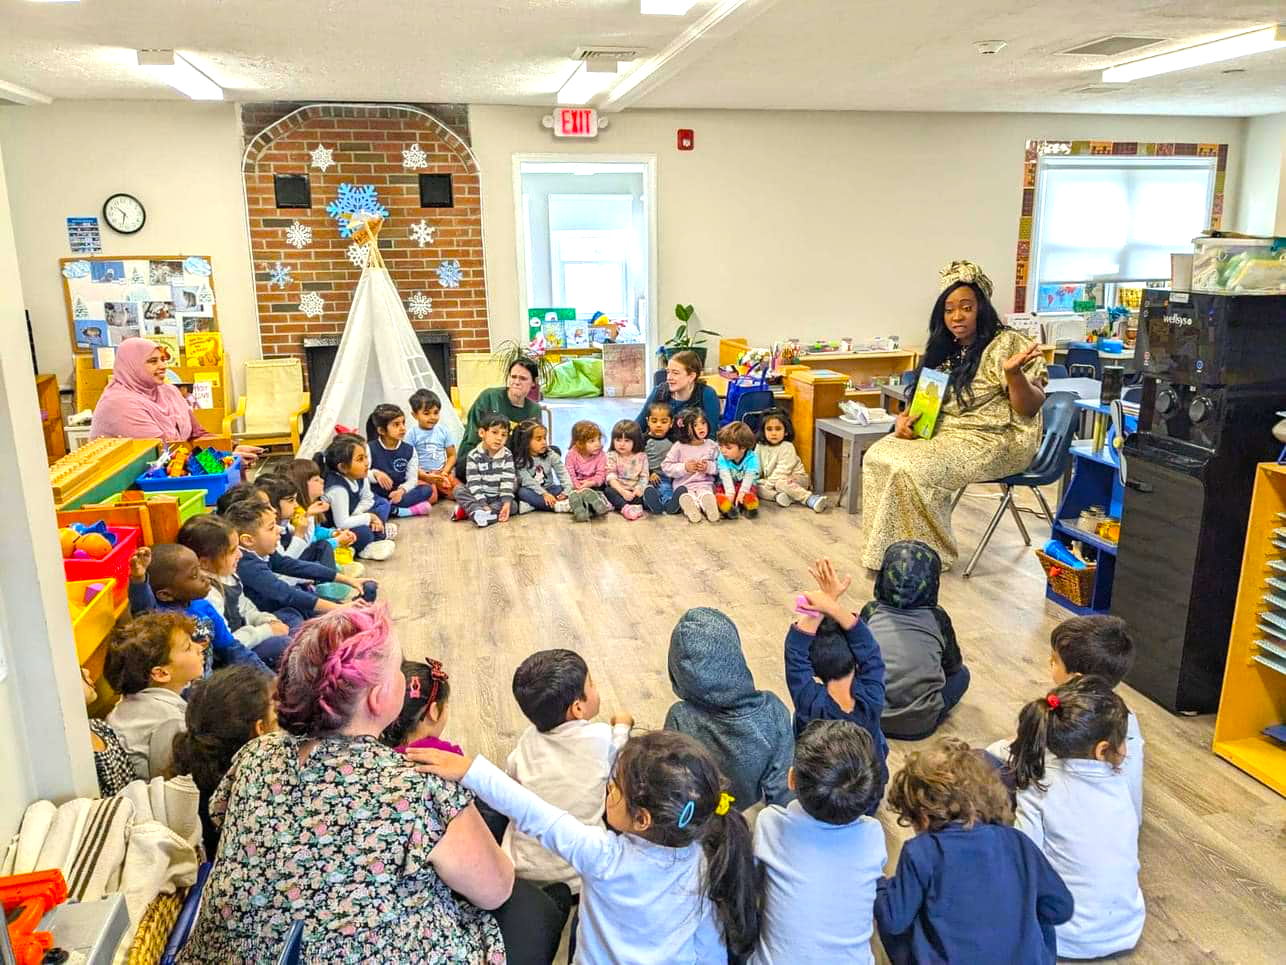 As Some Schools Are Banning Books And Black History, This Mom Is Sharing African Culture With Students Across America